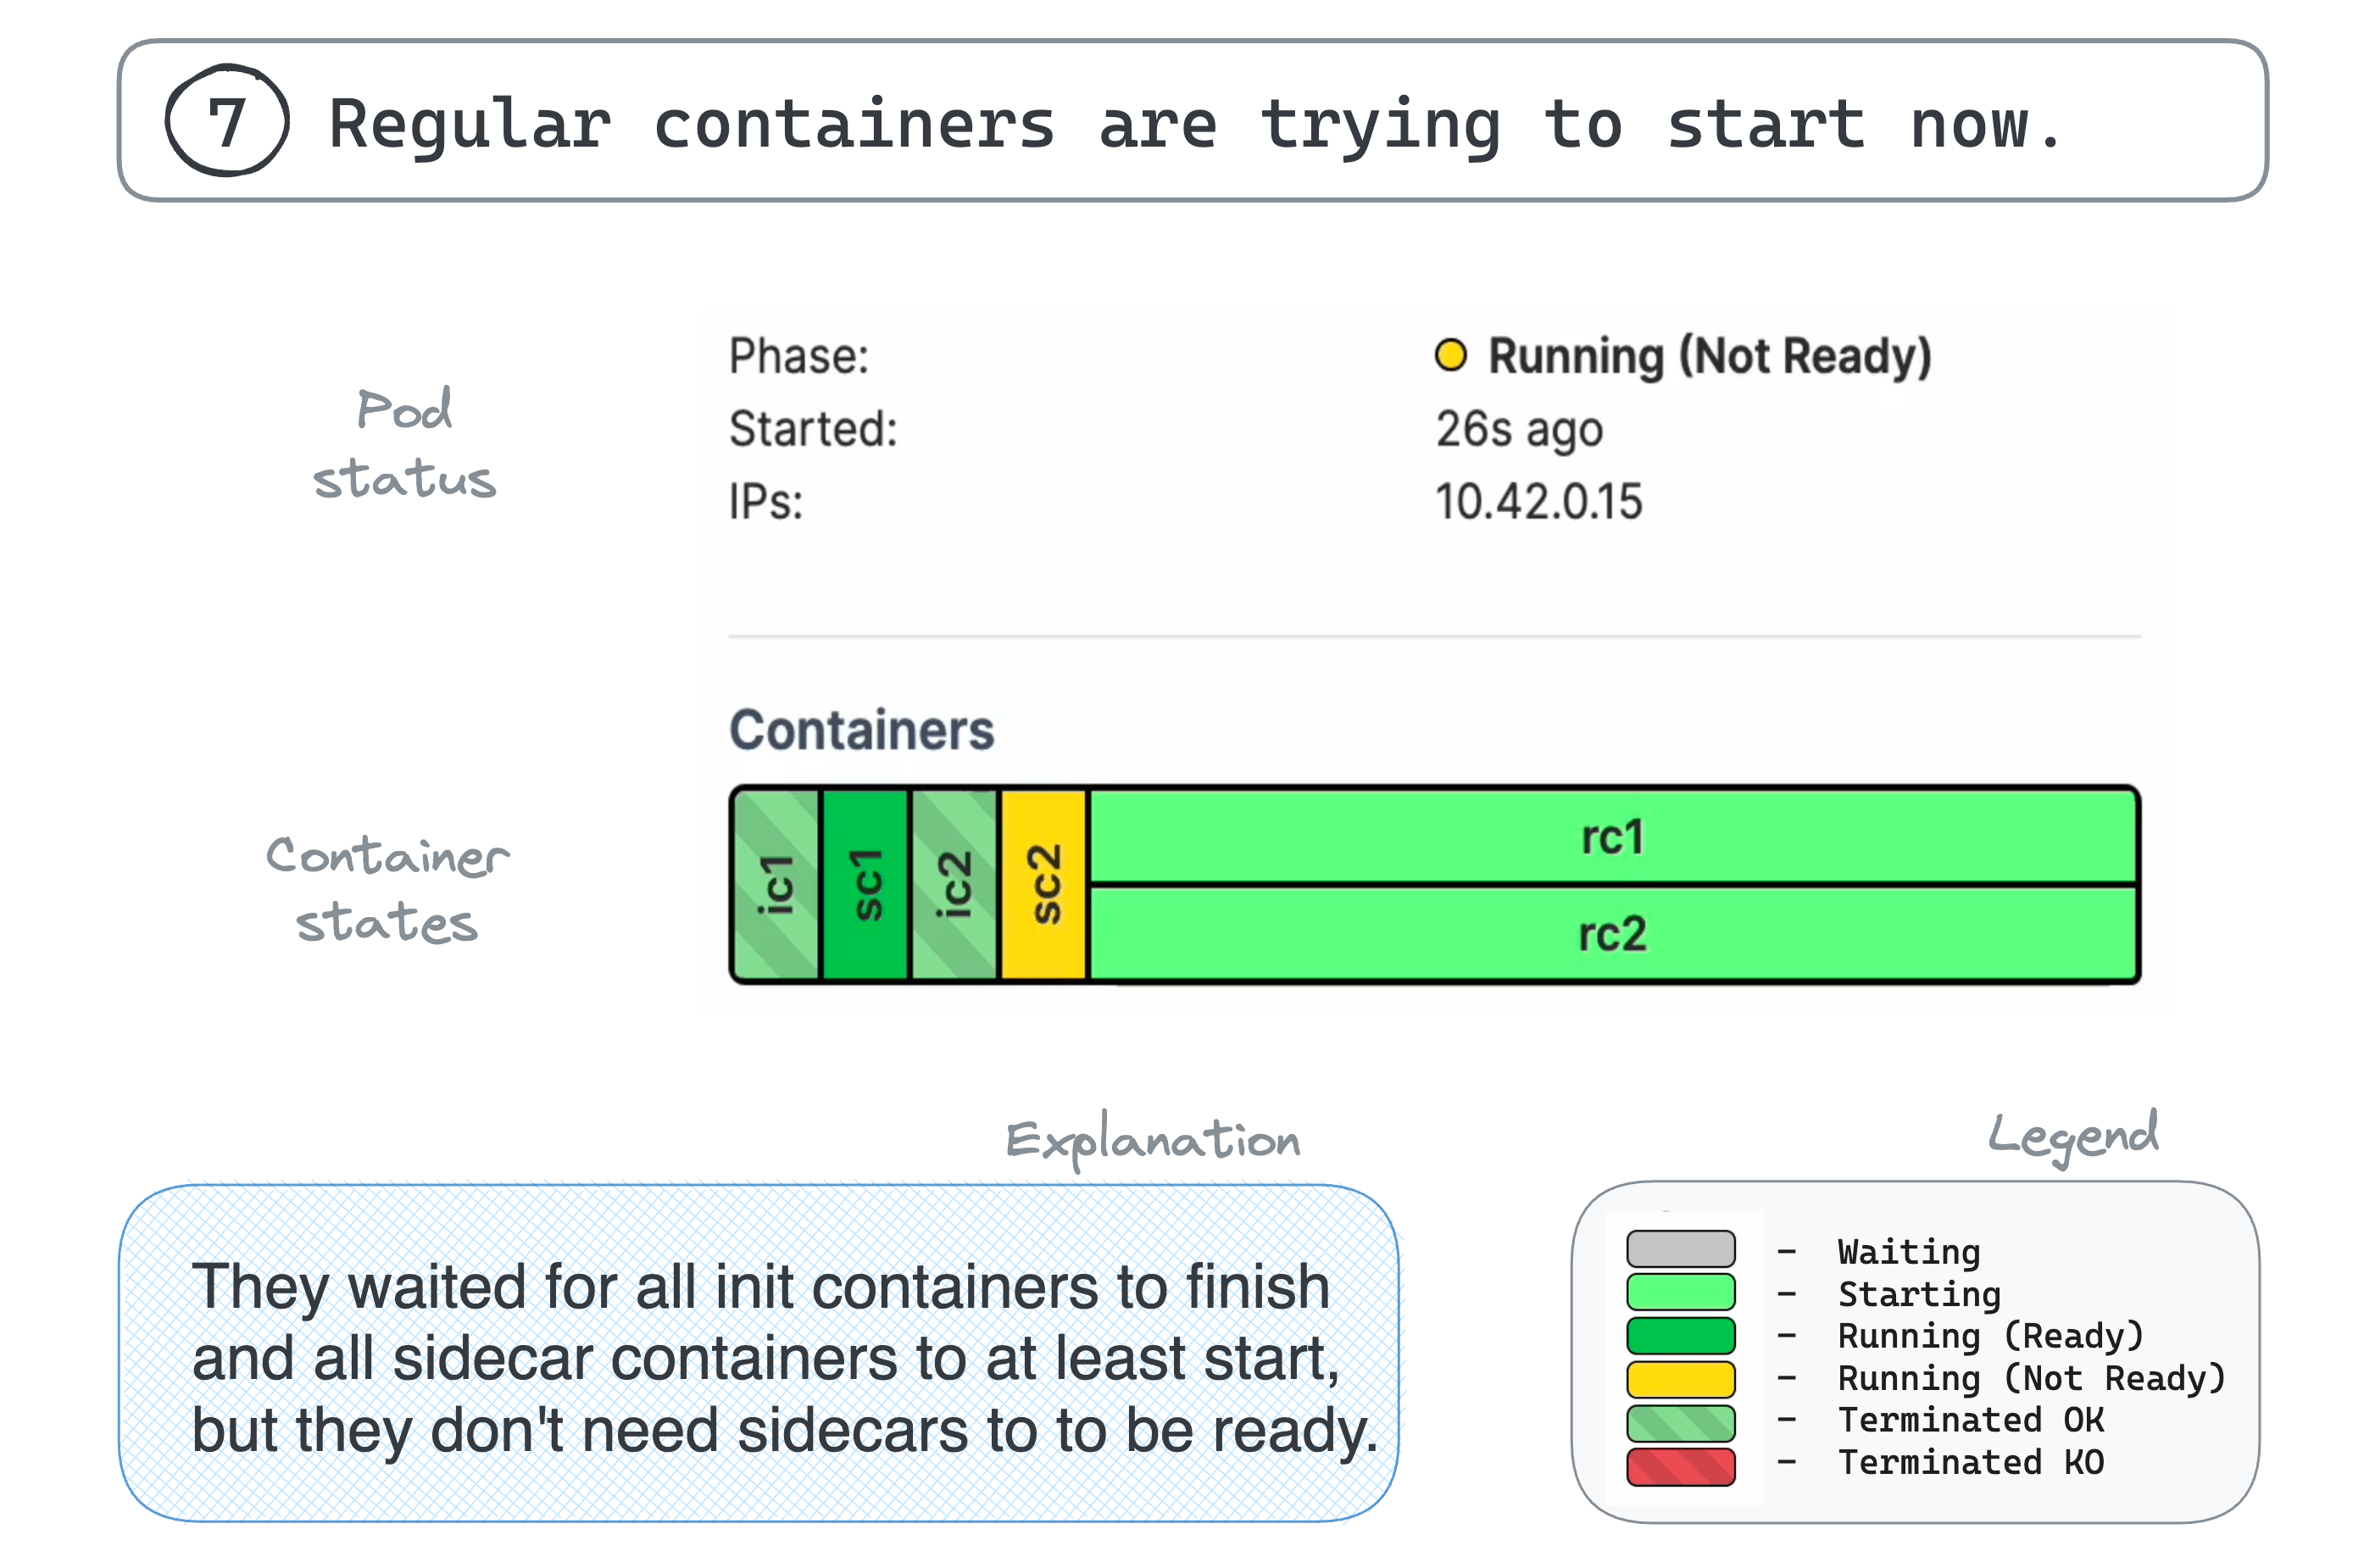 7. Regular containers are trying to start now.